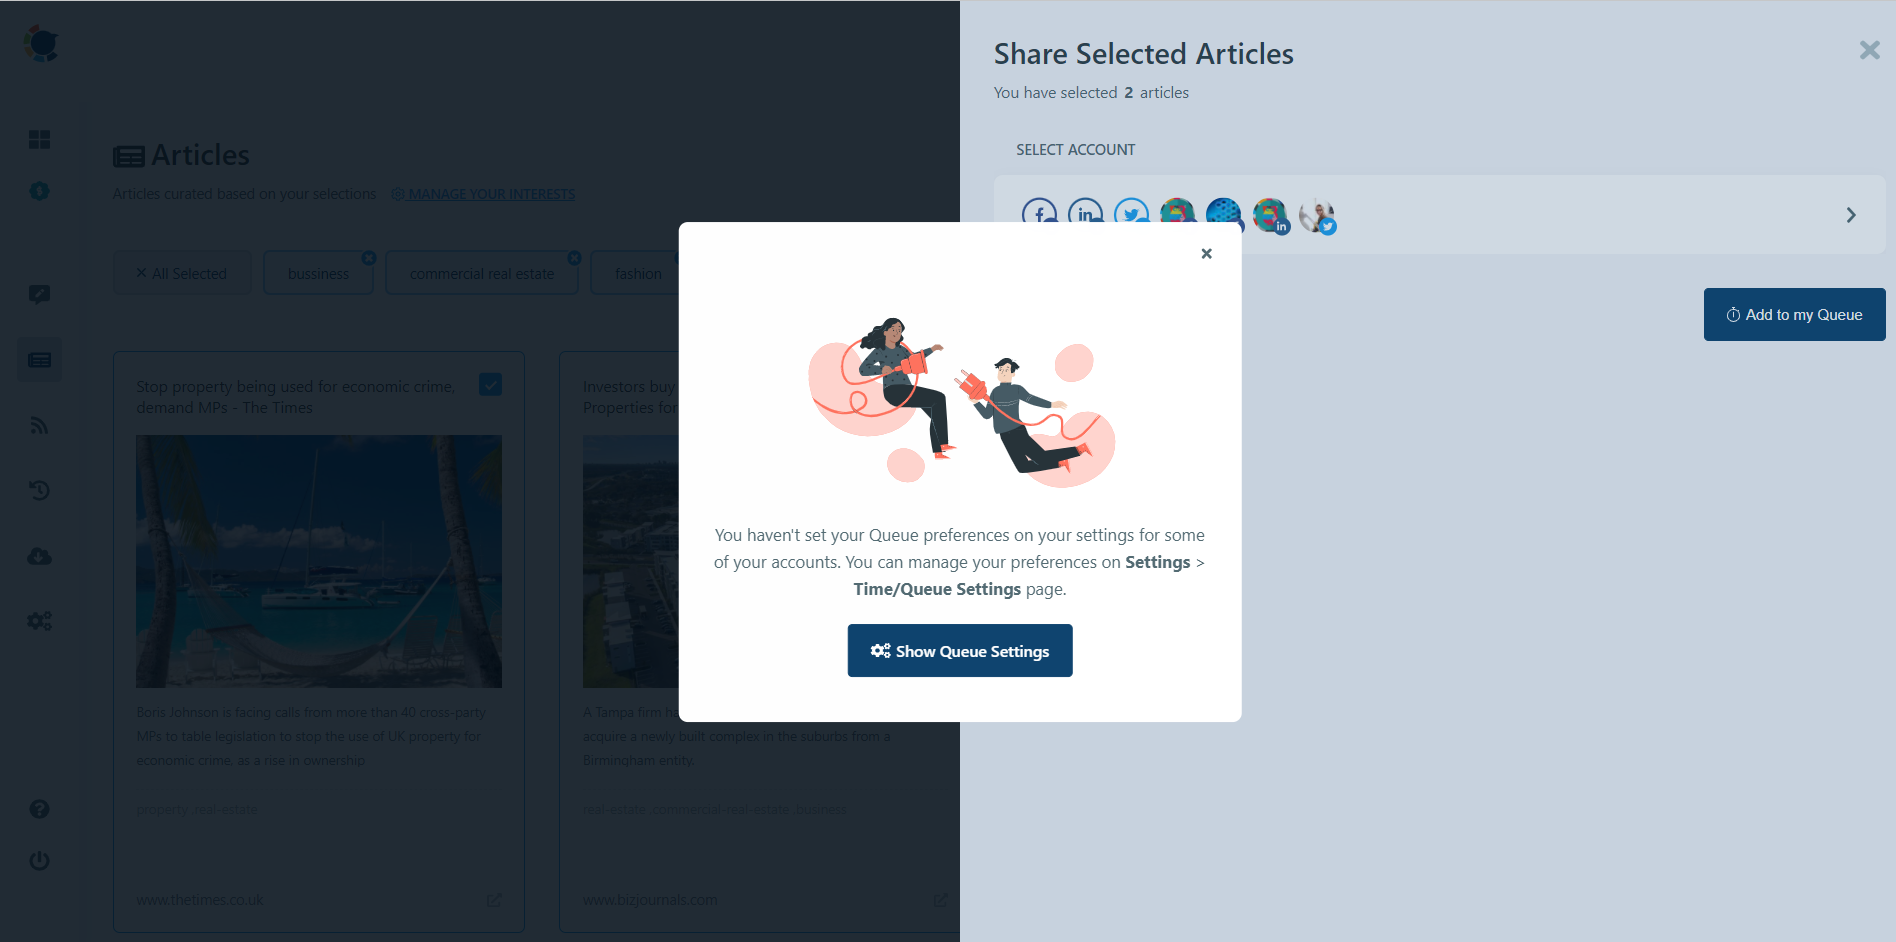 Take your content curator and get started content curation!